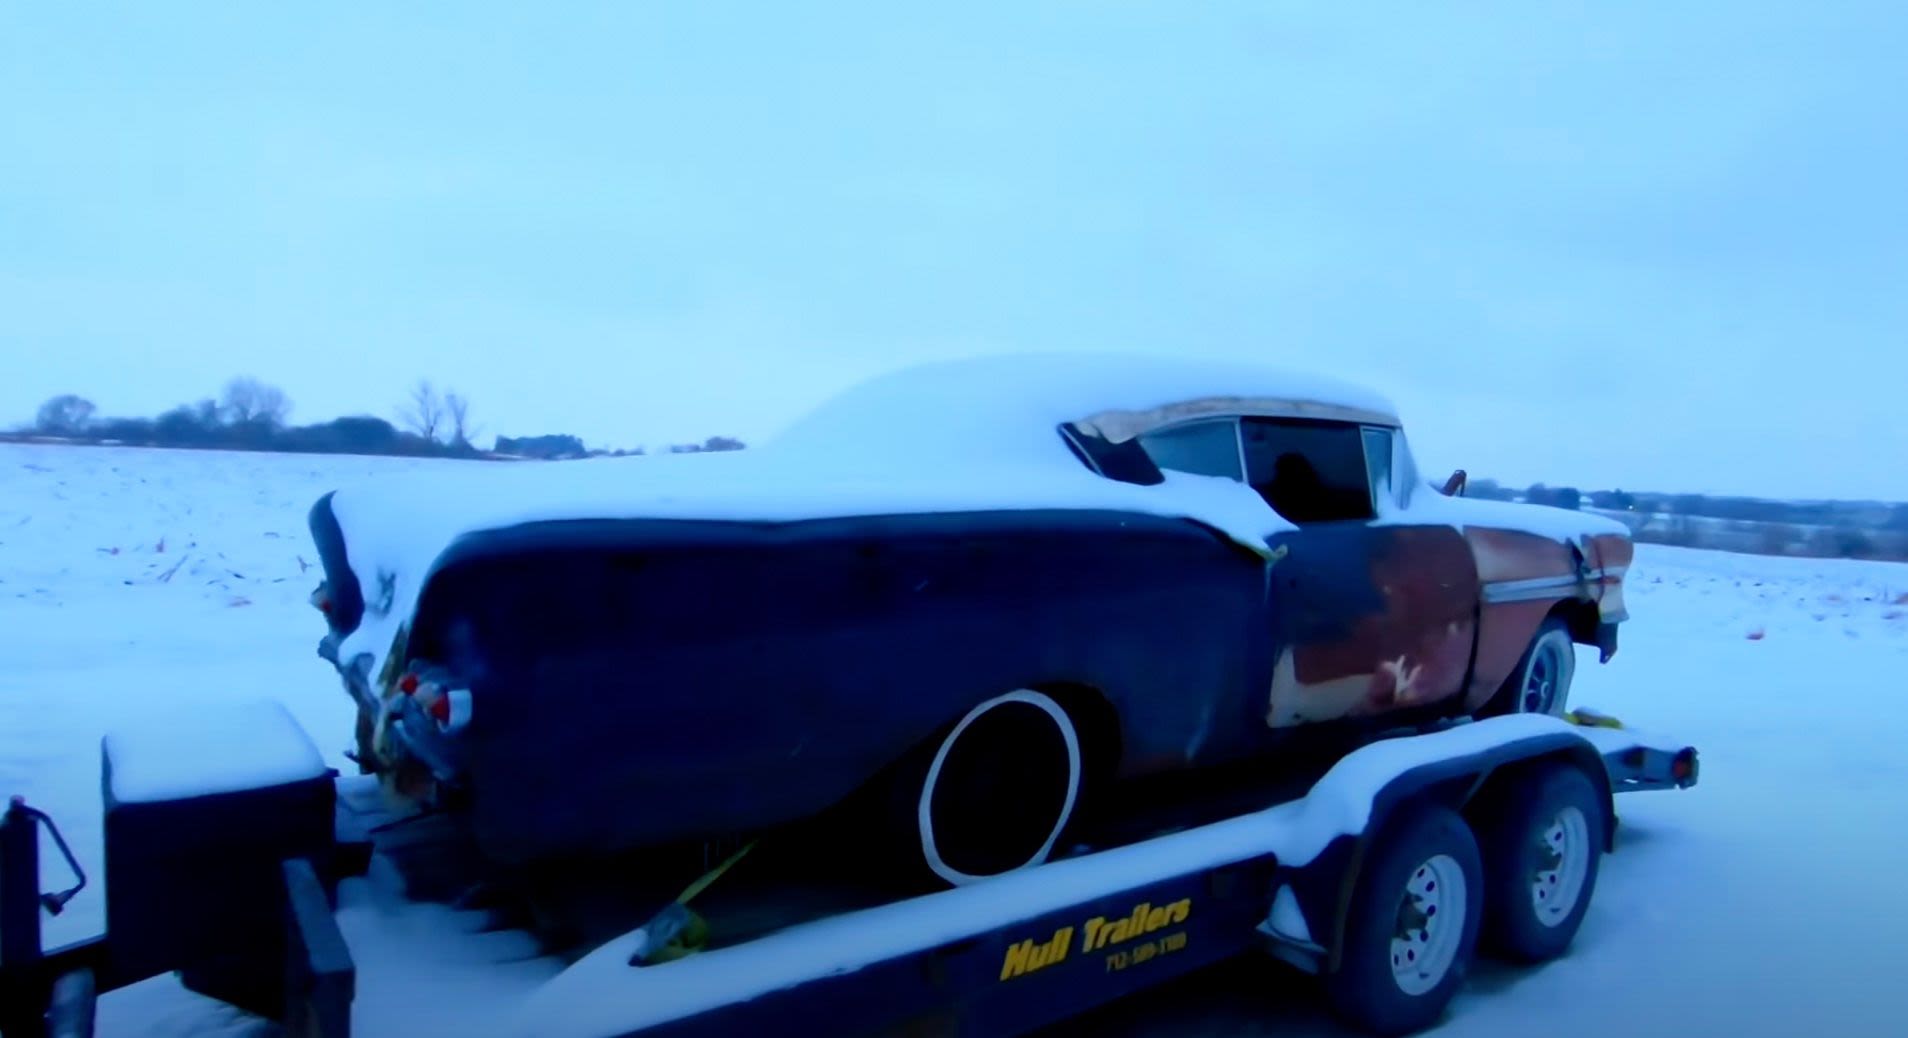 1958 Chevy Impala Looks For Redemption